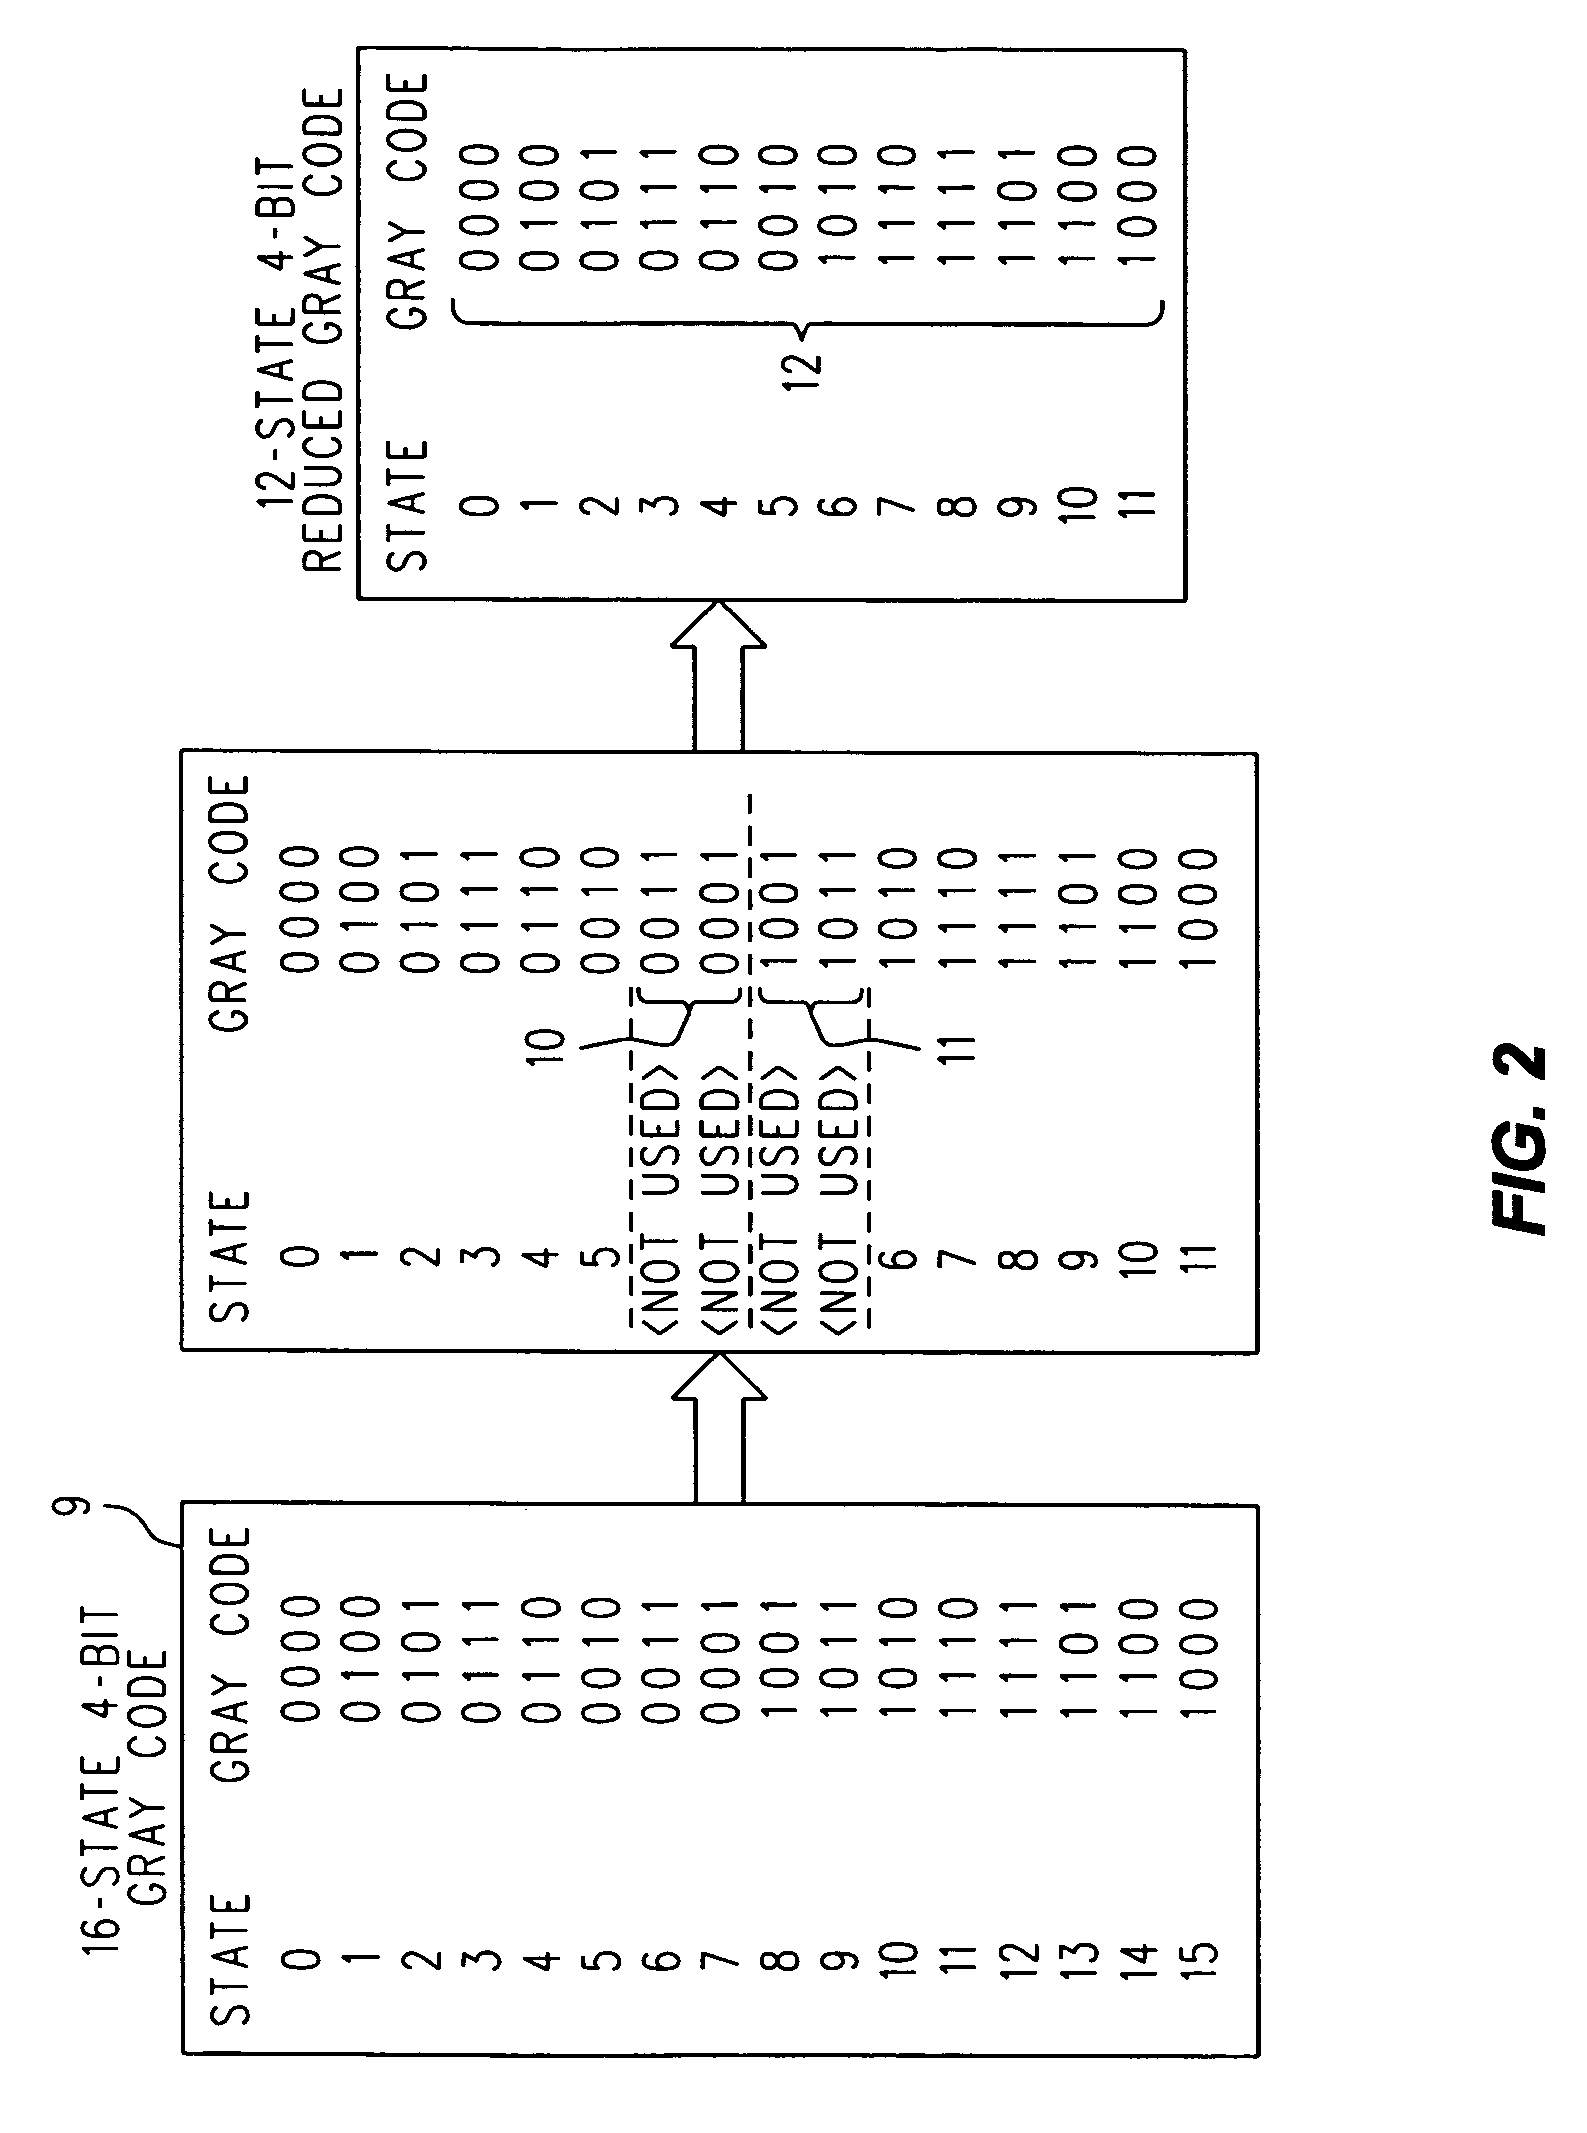 Method for generation of even numbered reduced gray codes